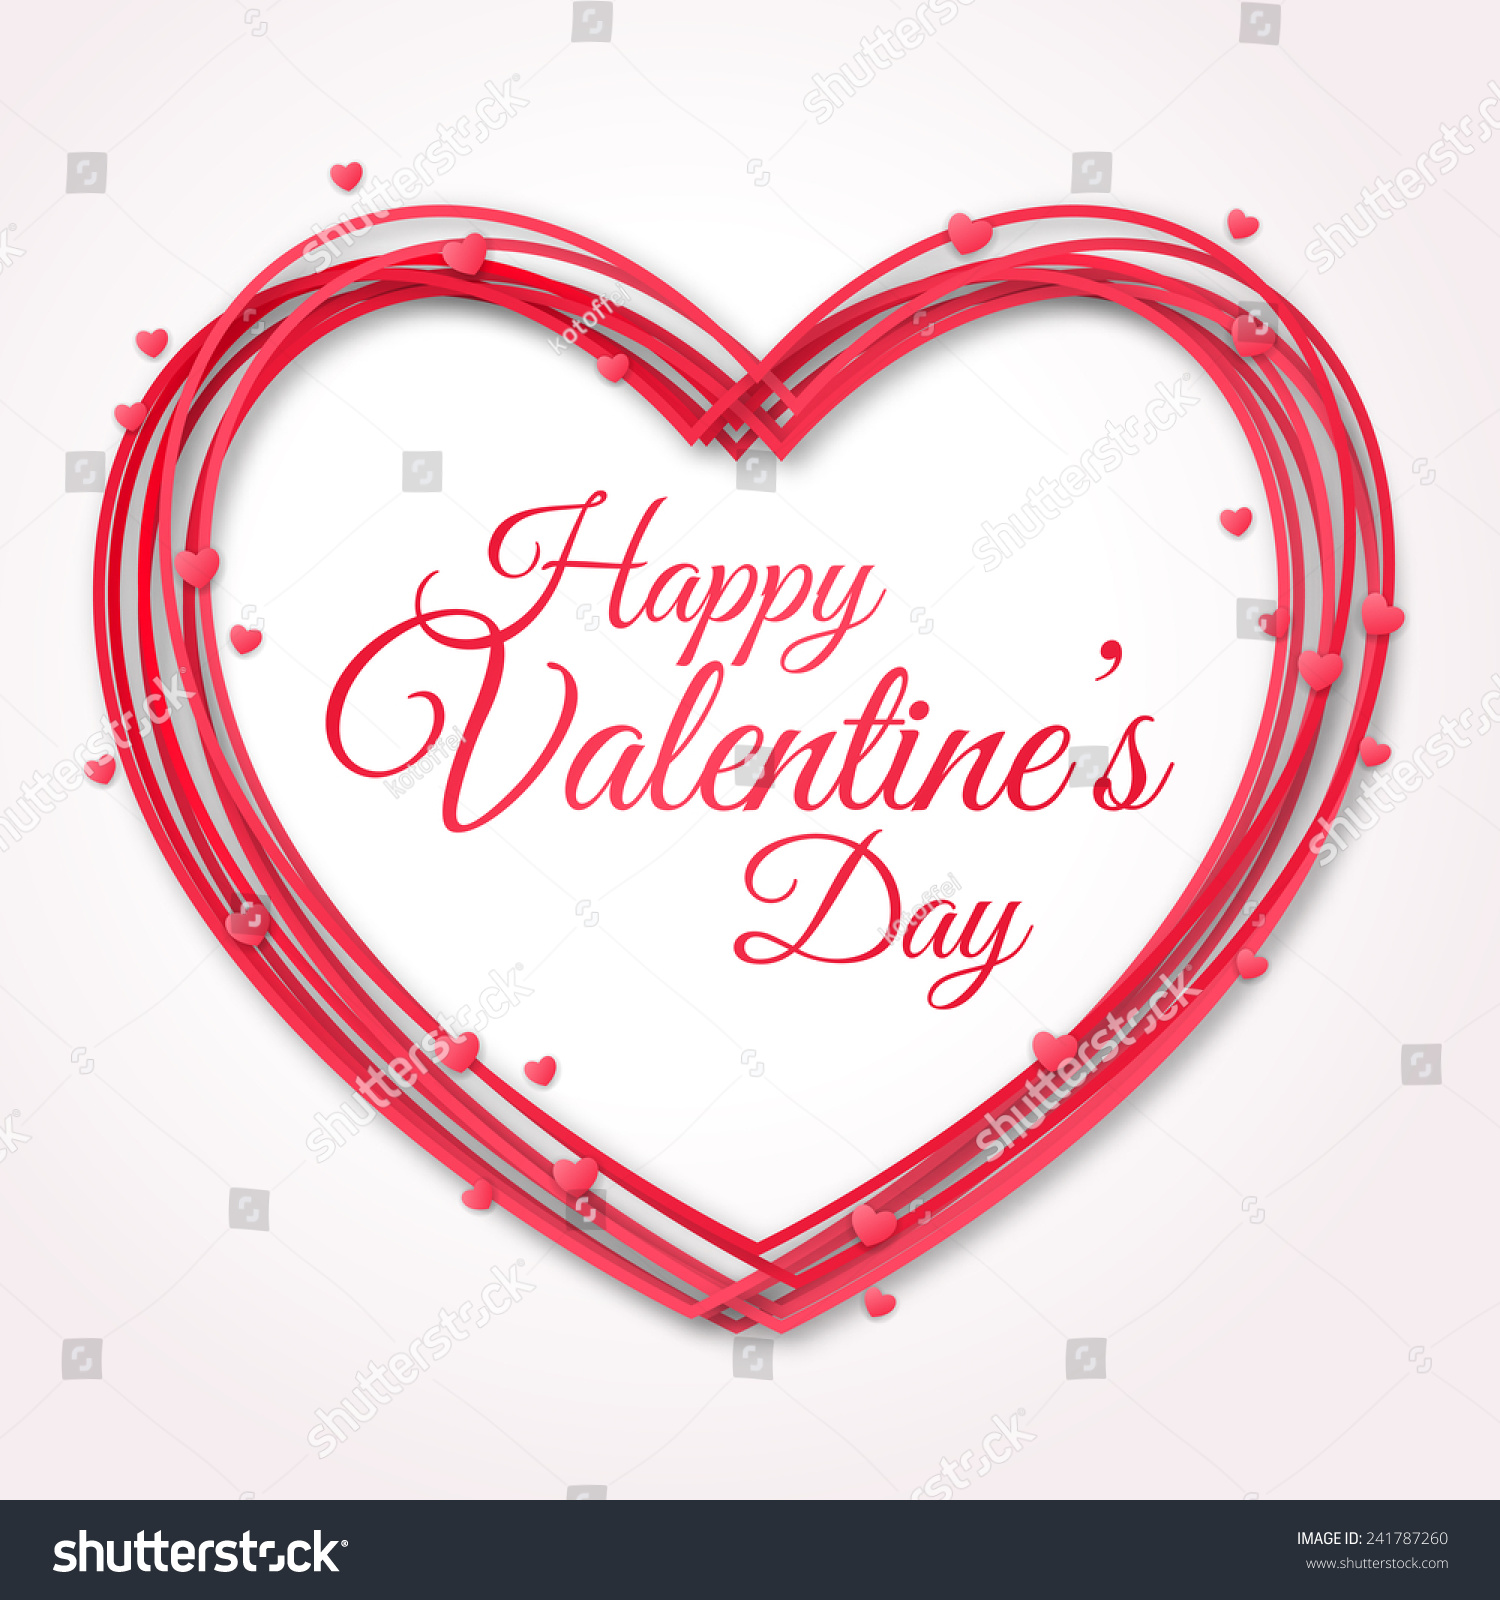 Happy Valentines Day Greeting Card. Vector Illustration. Heart Shape Design Template ...1500 x 1600